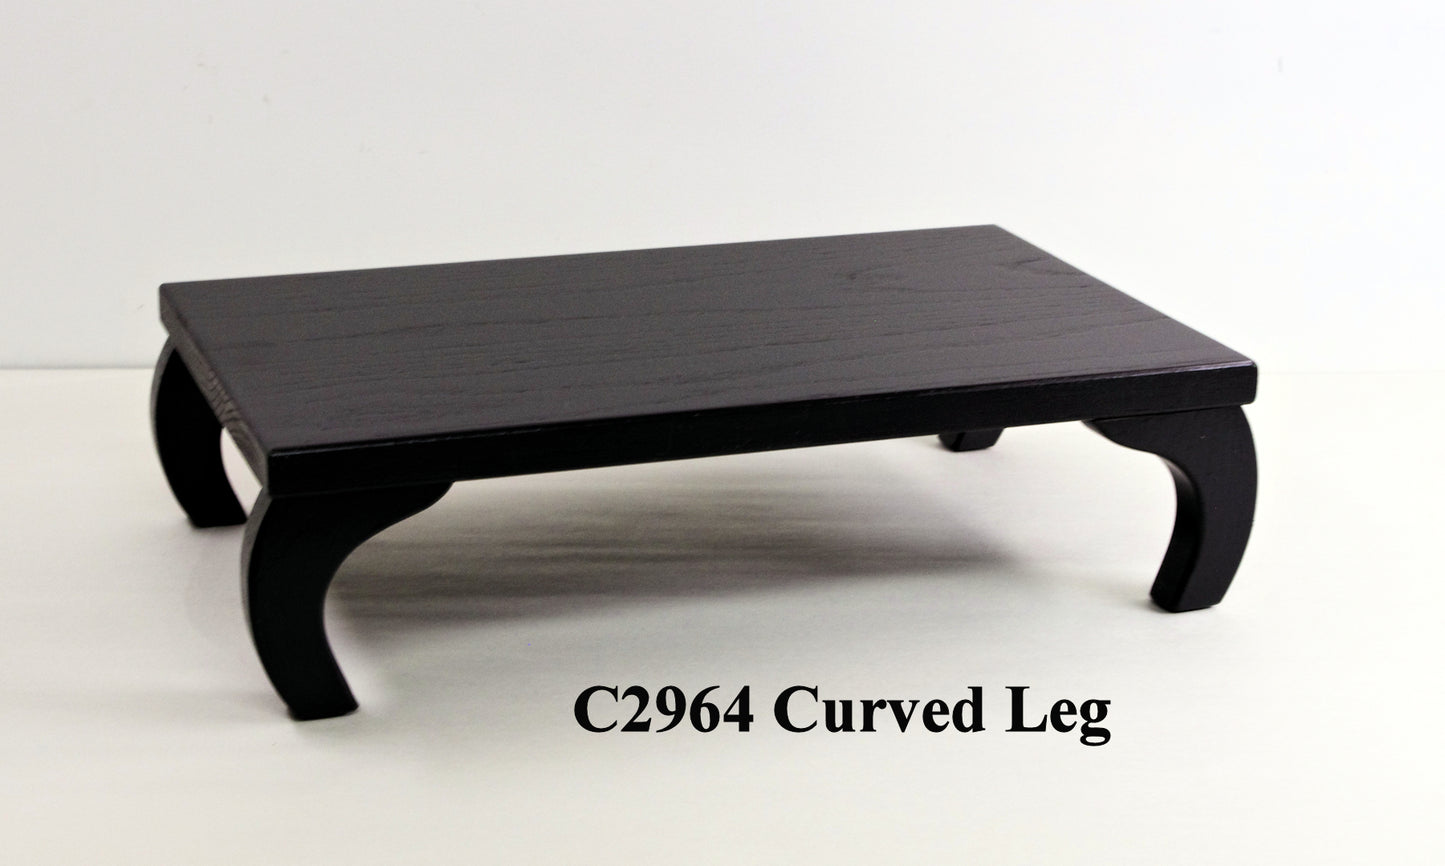 Bonsai Stand Curved Leg C2964 Made to Order 18" Length